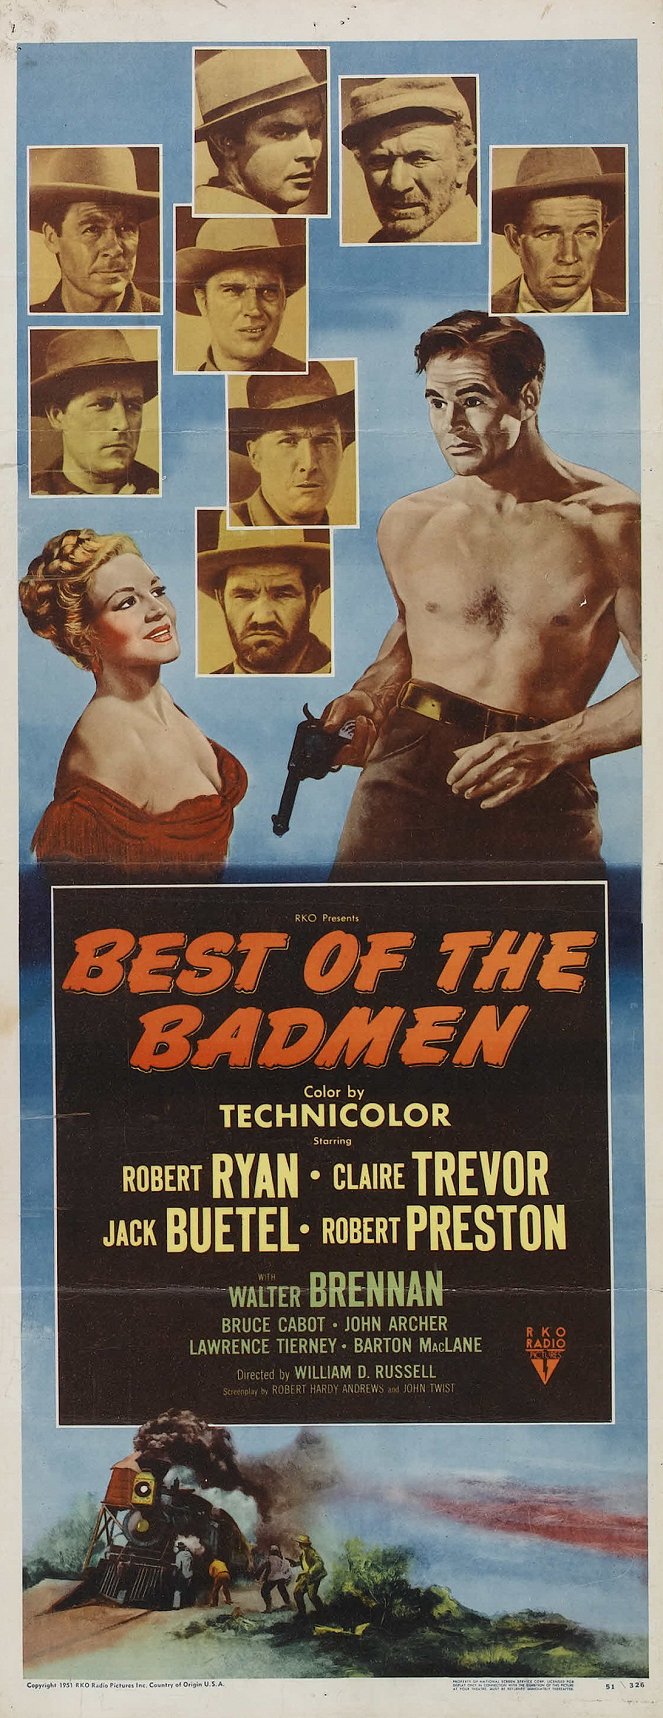 Best of the Badmen - Posters